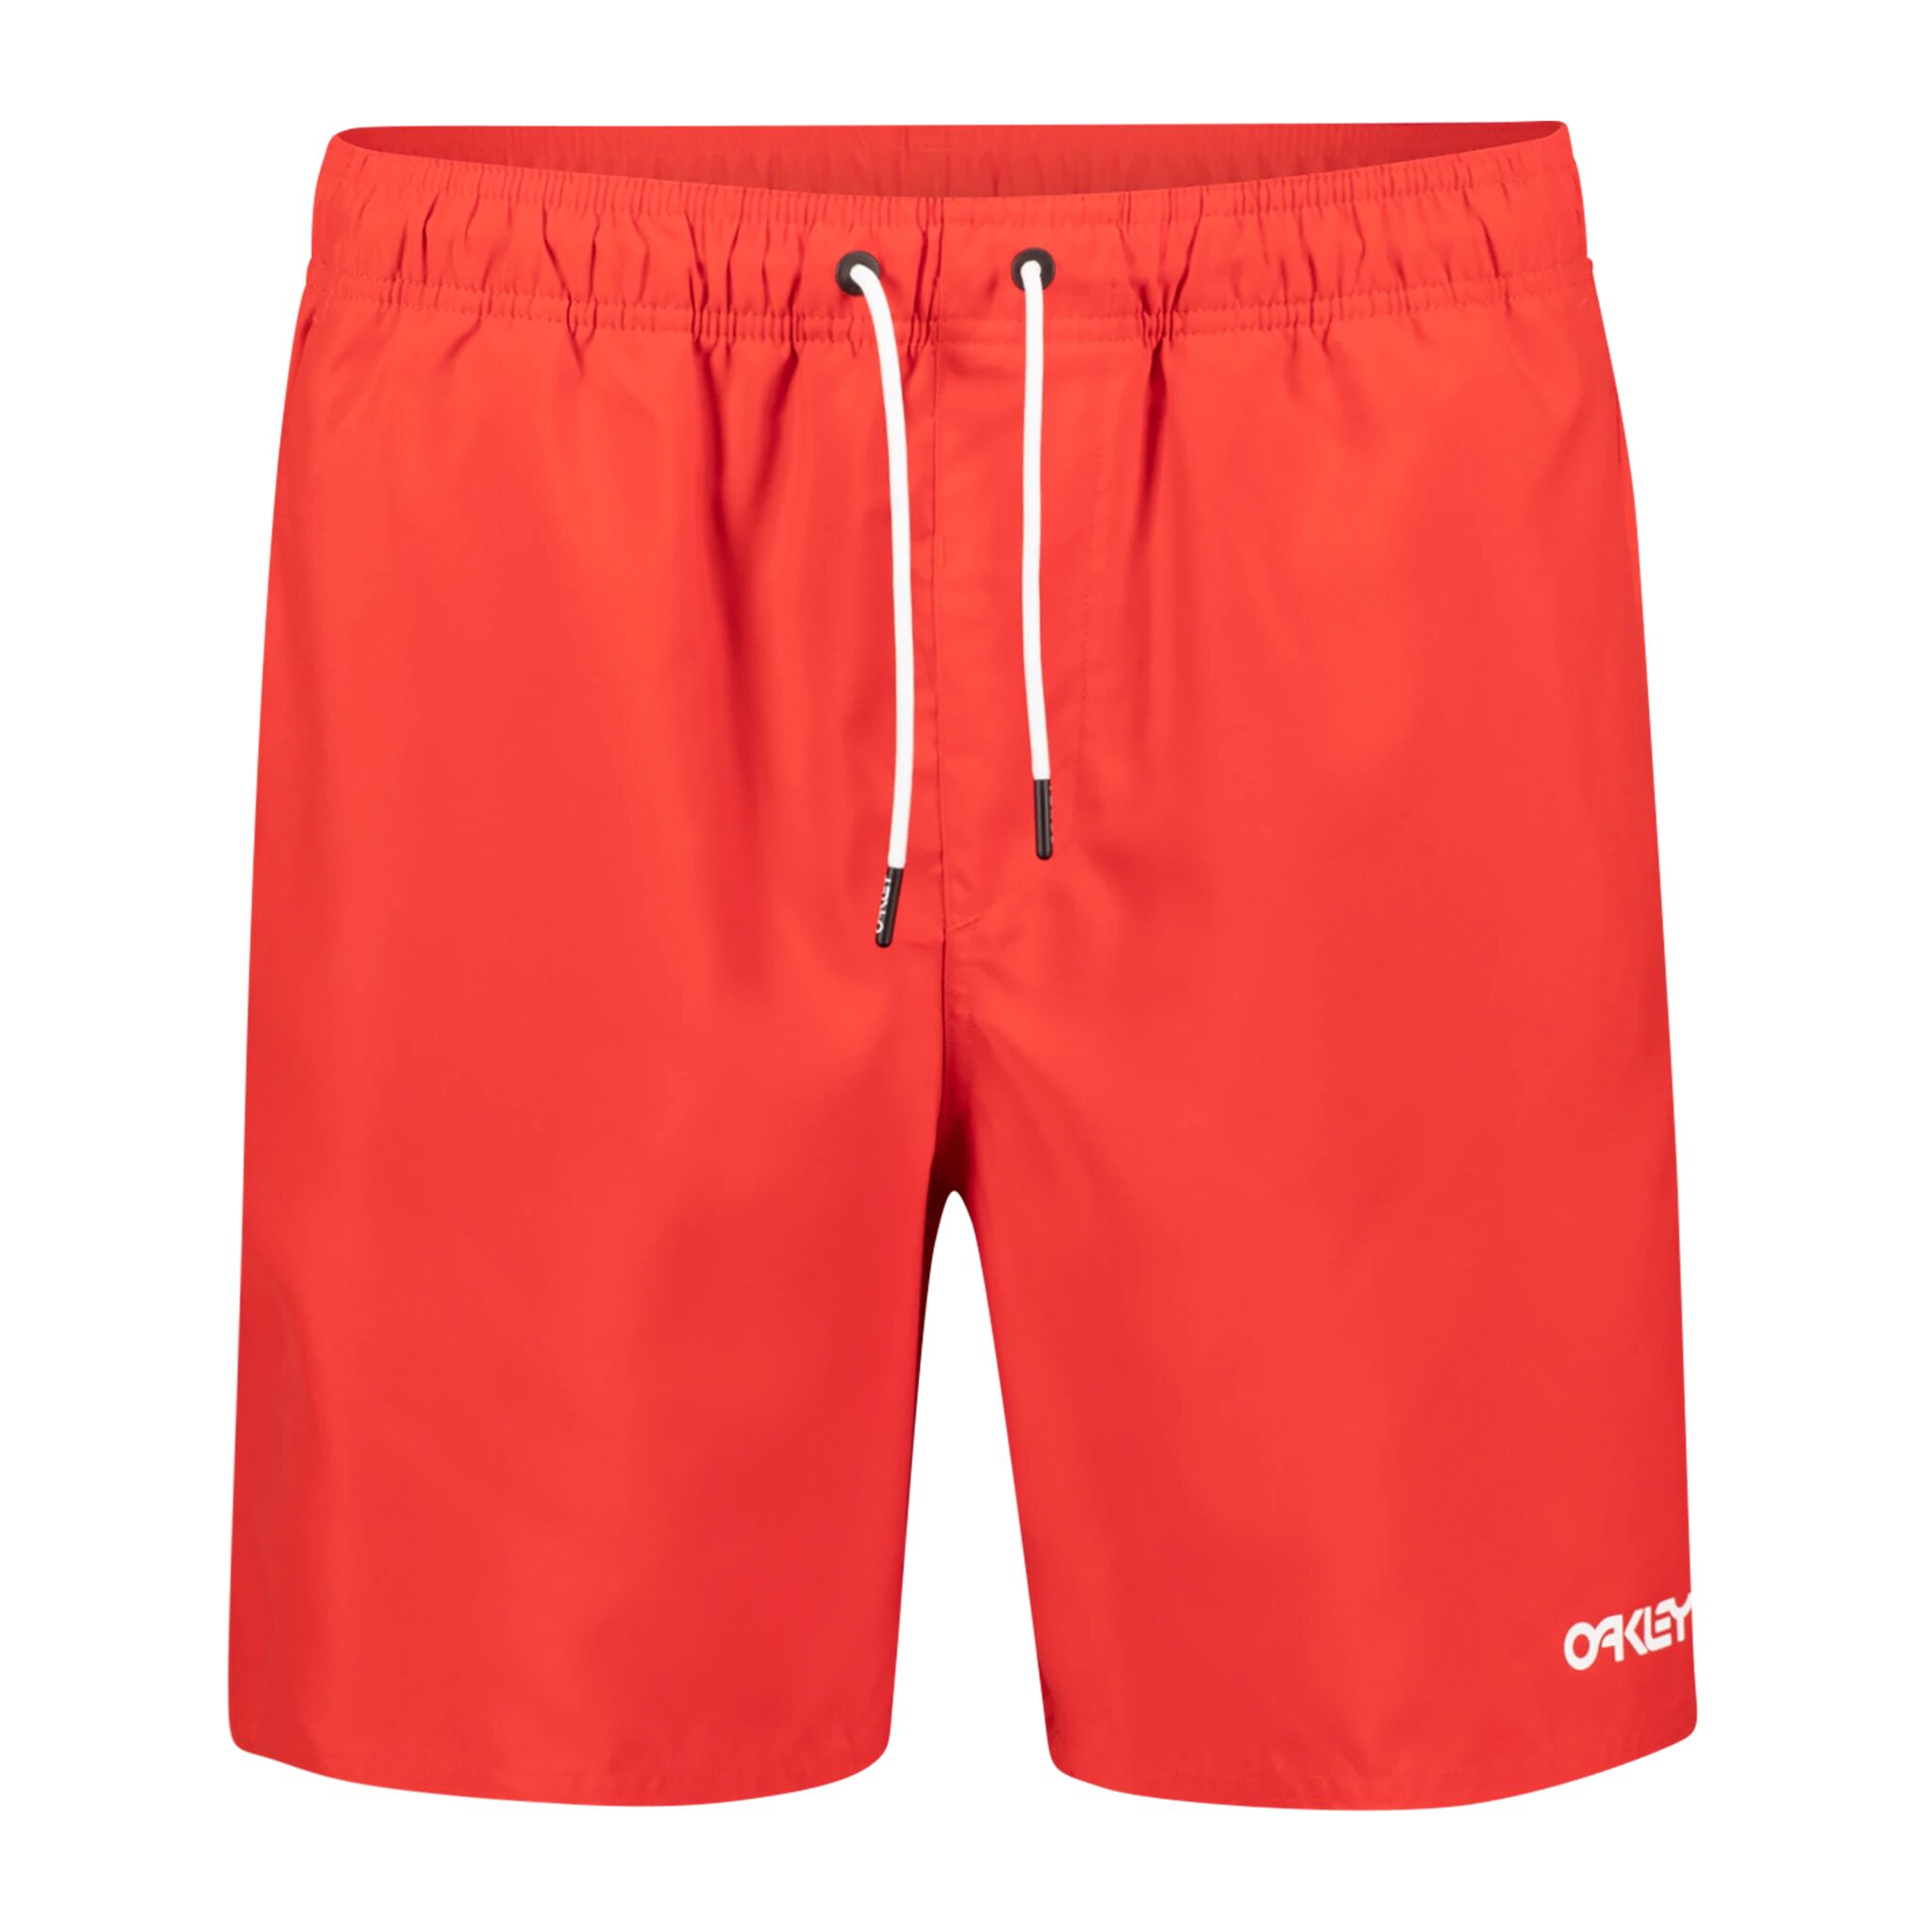 Oakley New Ace Volley 2.1 18'', badeshorts herre M high risk red